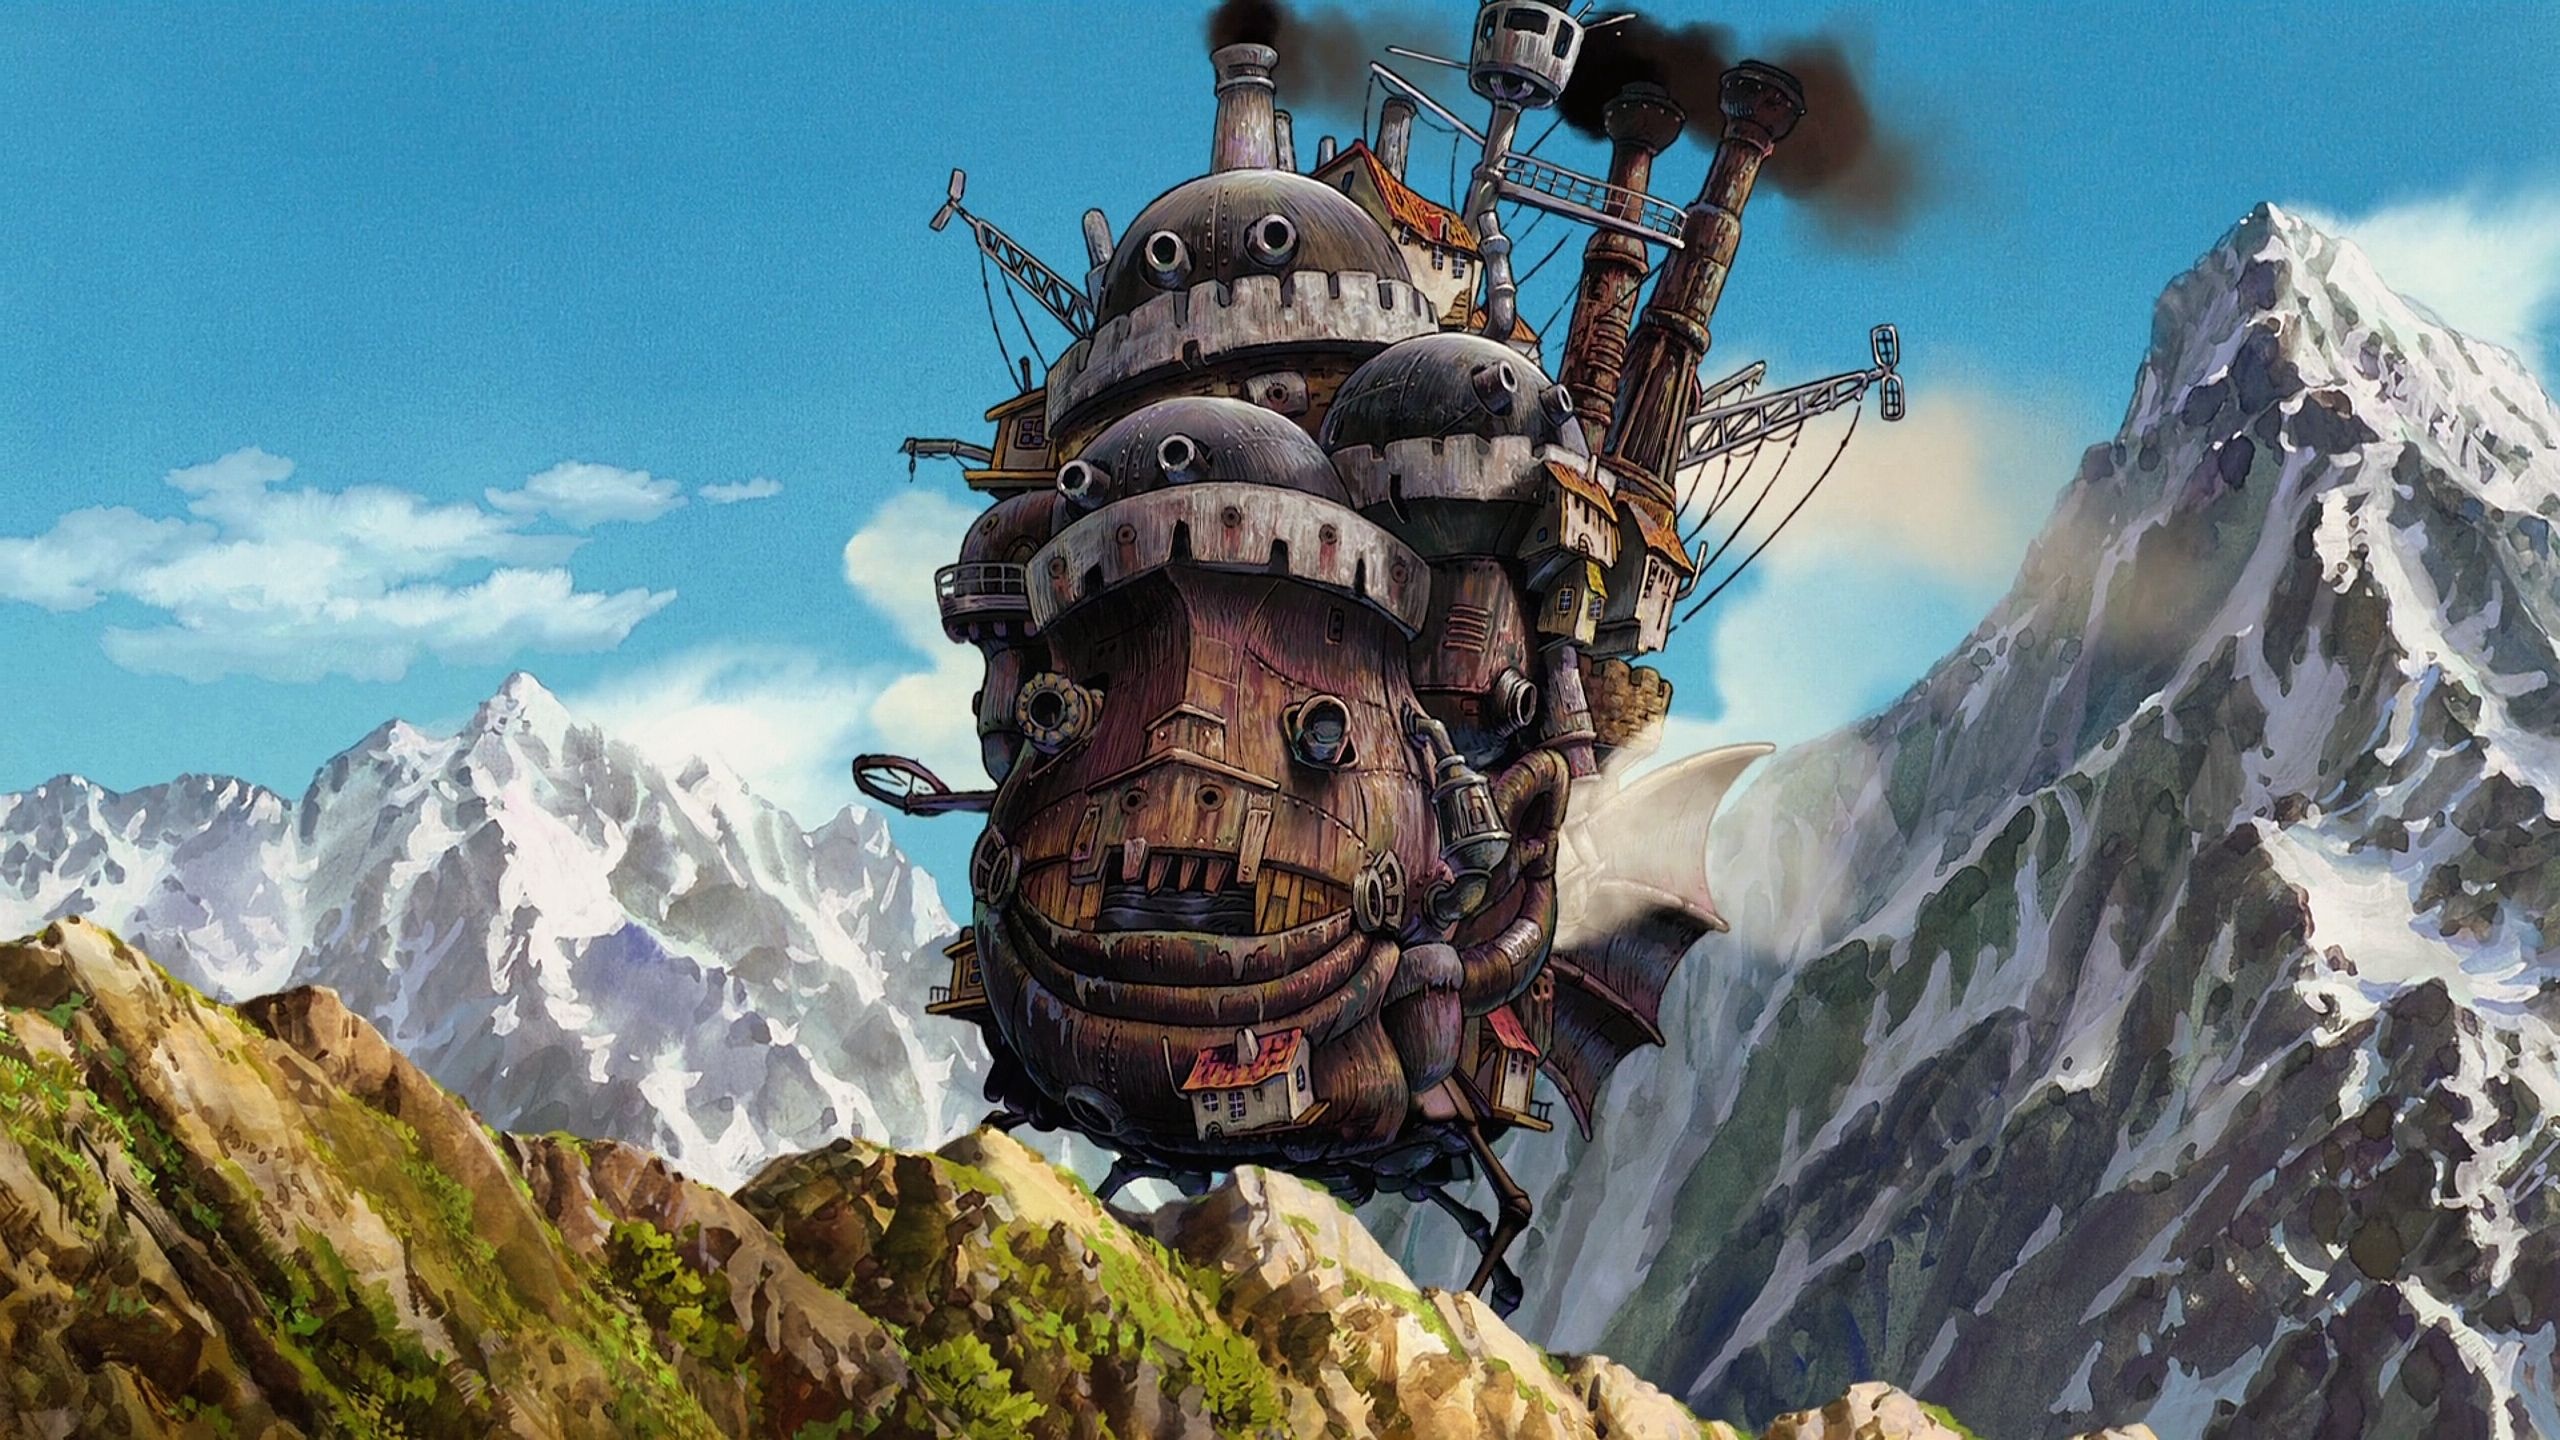 Howl's Moving Castle image gallery, Captivating scenes, Gorgeous animation, Artistic masterpiece, 2560x1440 HD Desktop